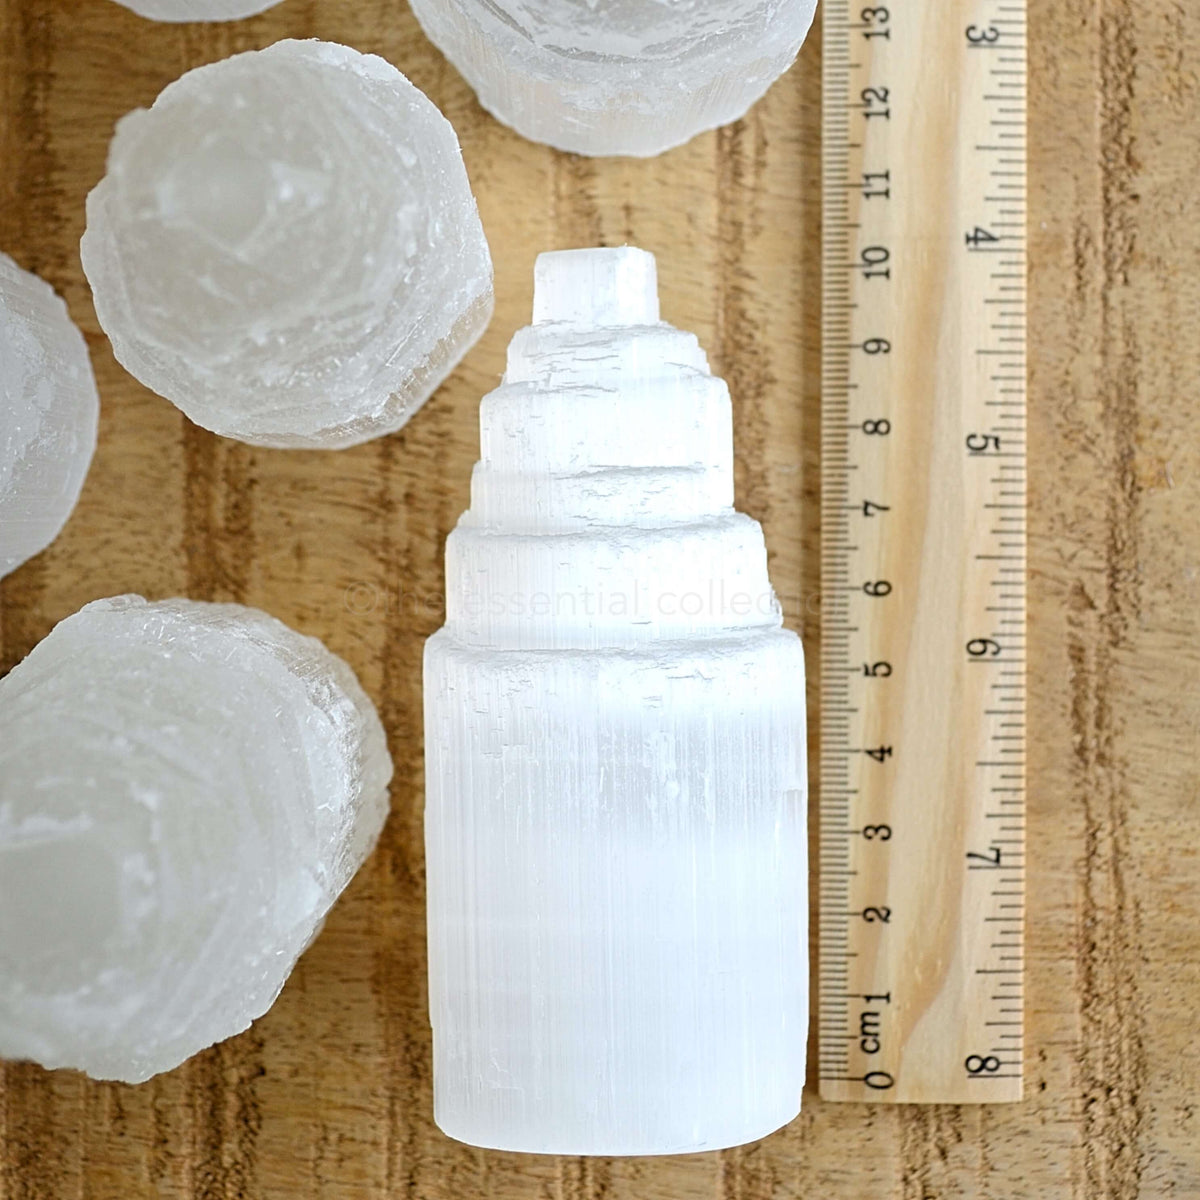 white selenite tower 10cm tall with ruler showing height